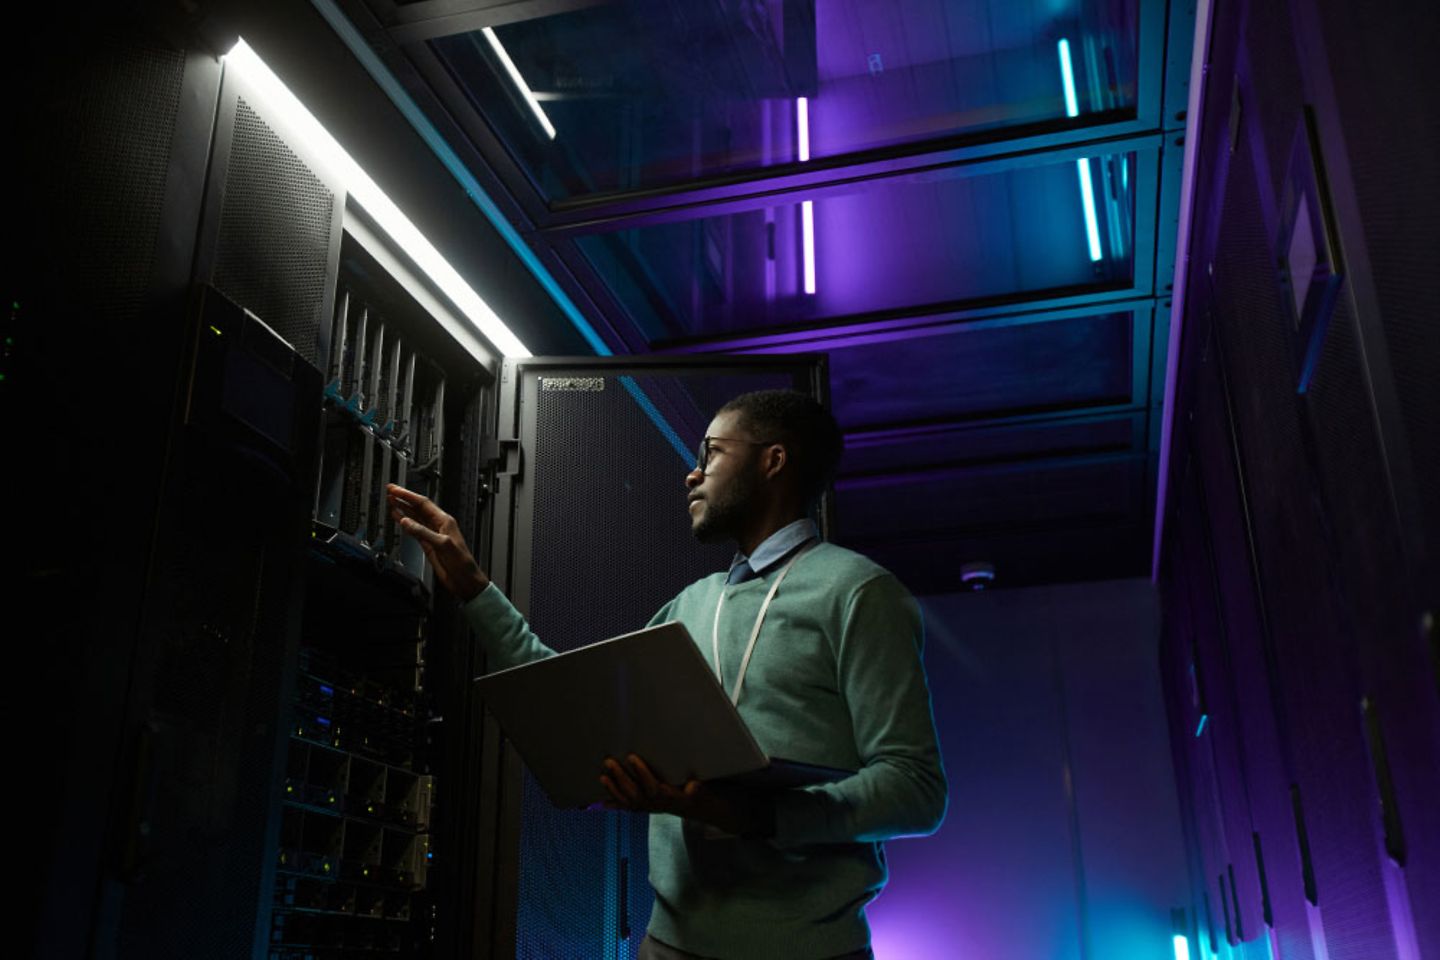 A man stands with laptop in a dark server room at an open server cabinet